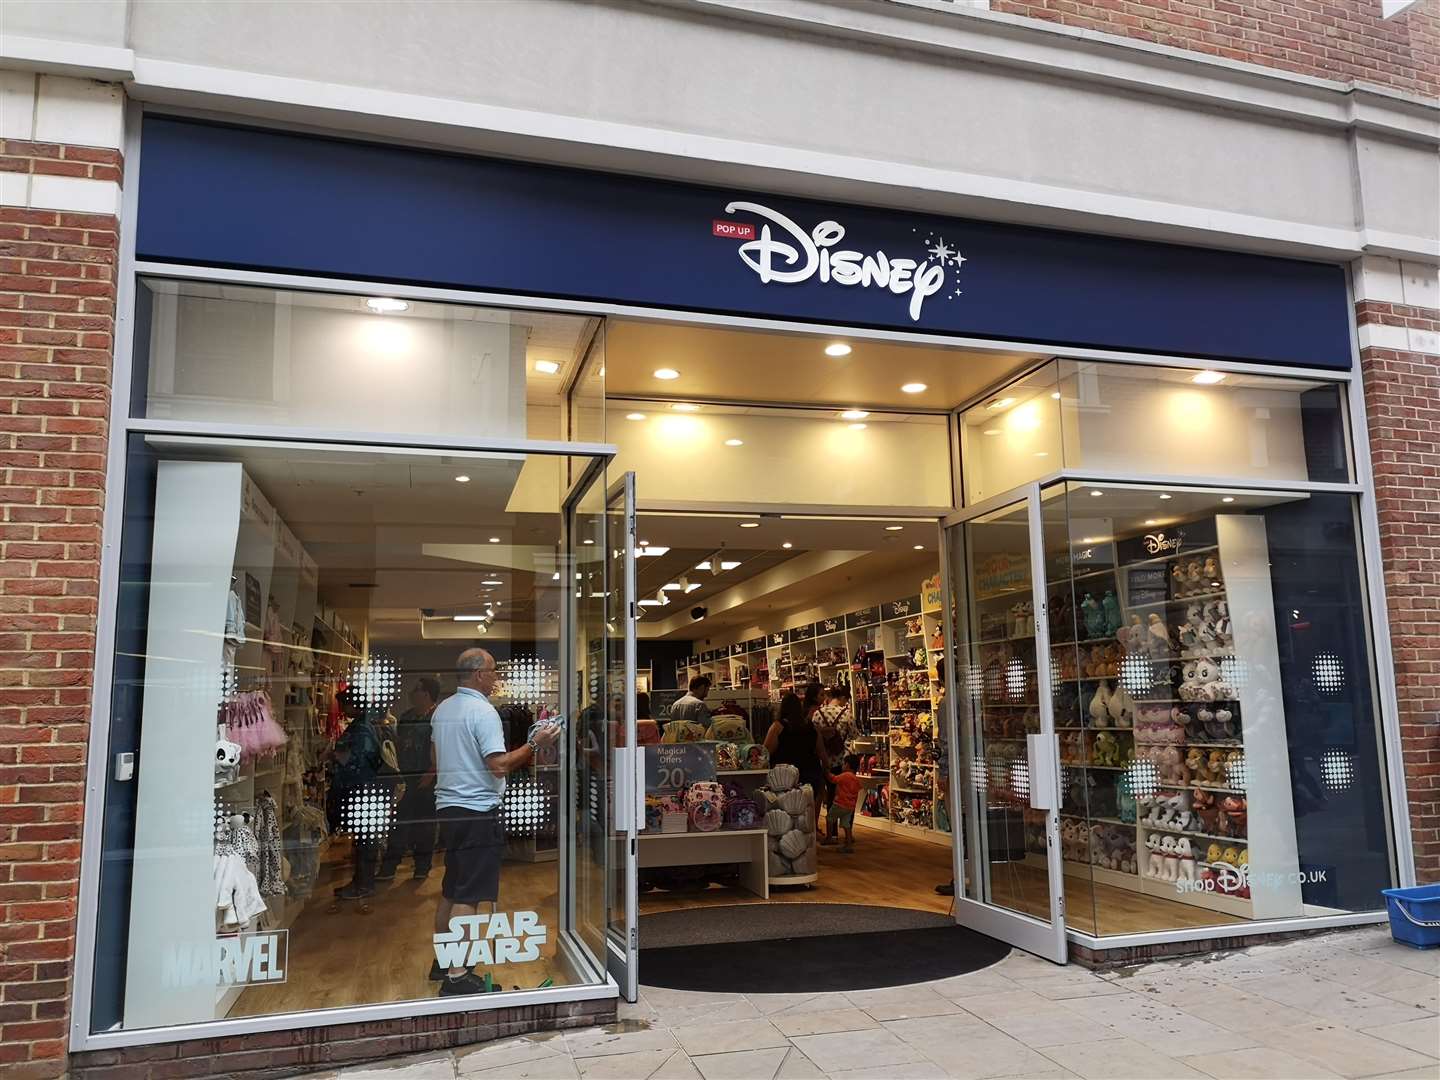 The pop-up DIsney store on its opening last August